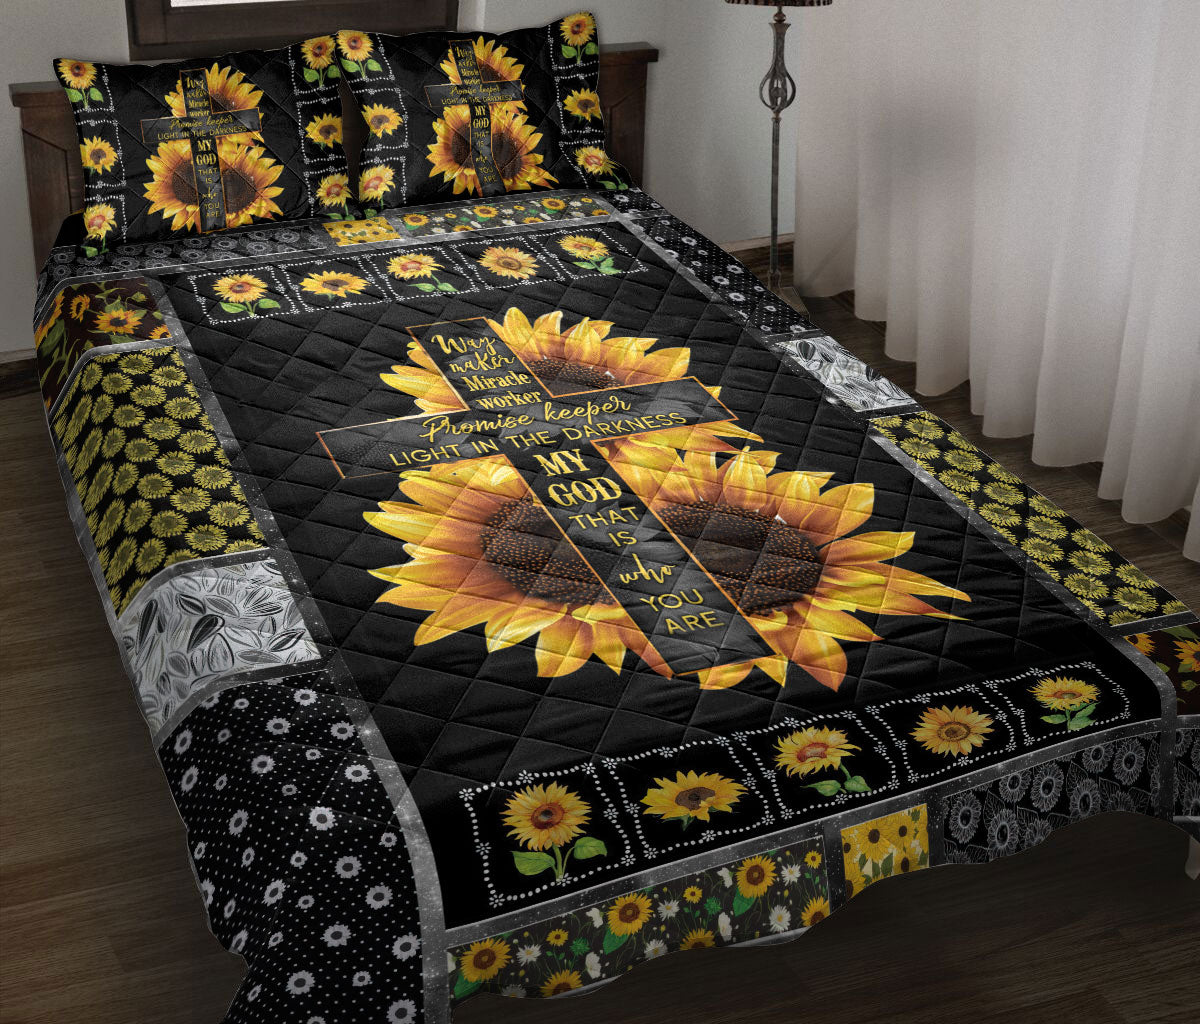 Ohaprints-Quilt-Bed-Set-Pillowcase-Faith-Sunflower-Jesus-God-Cross-Christian-Religious-Floral-Patchwork-Pattern-Blanket-Bedspread-Bedding-882-Throw (55'' x 60'')